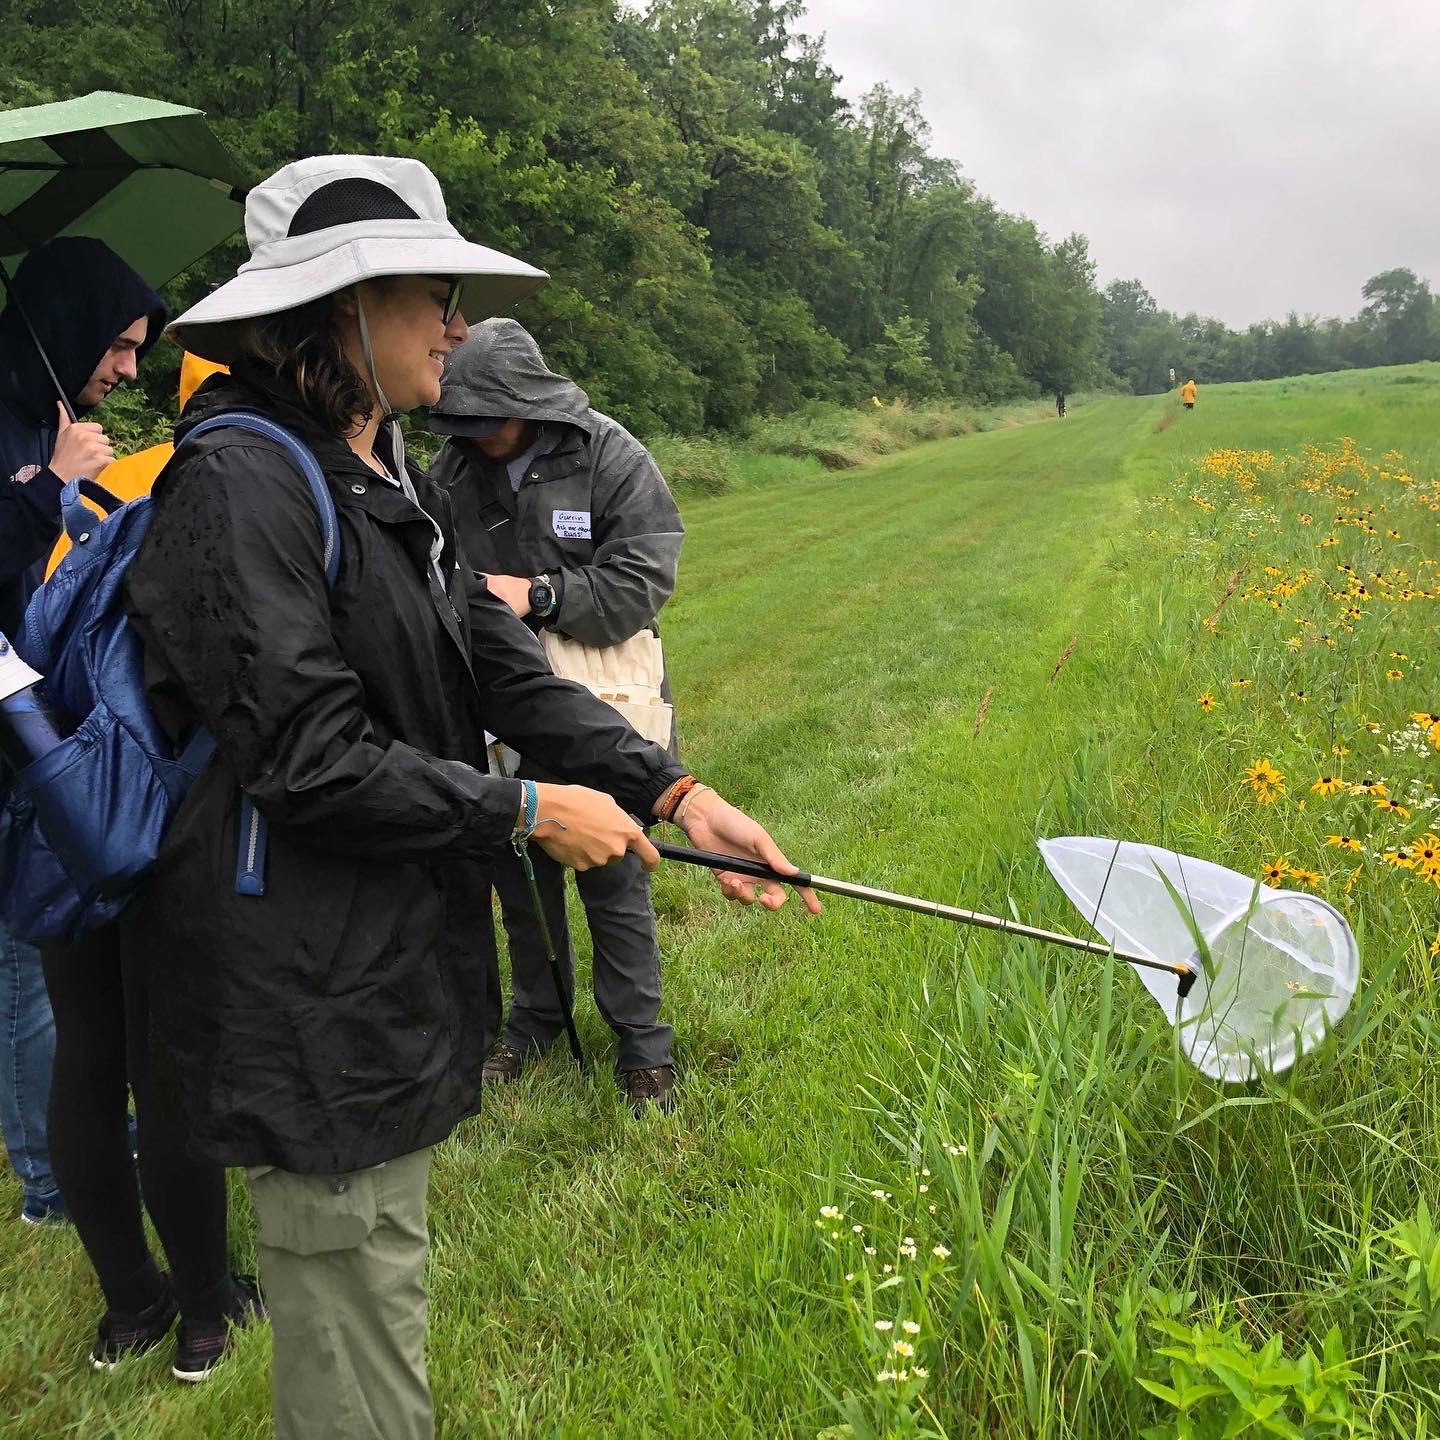 Participant uses net to catch various insects in order to determine prairie's biodiversity